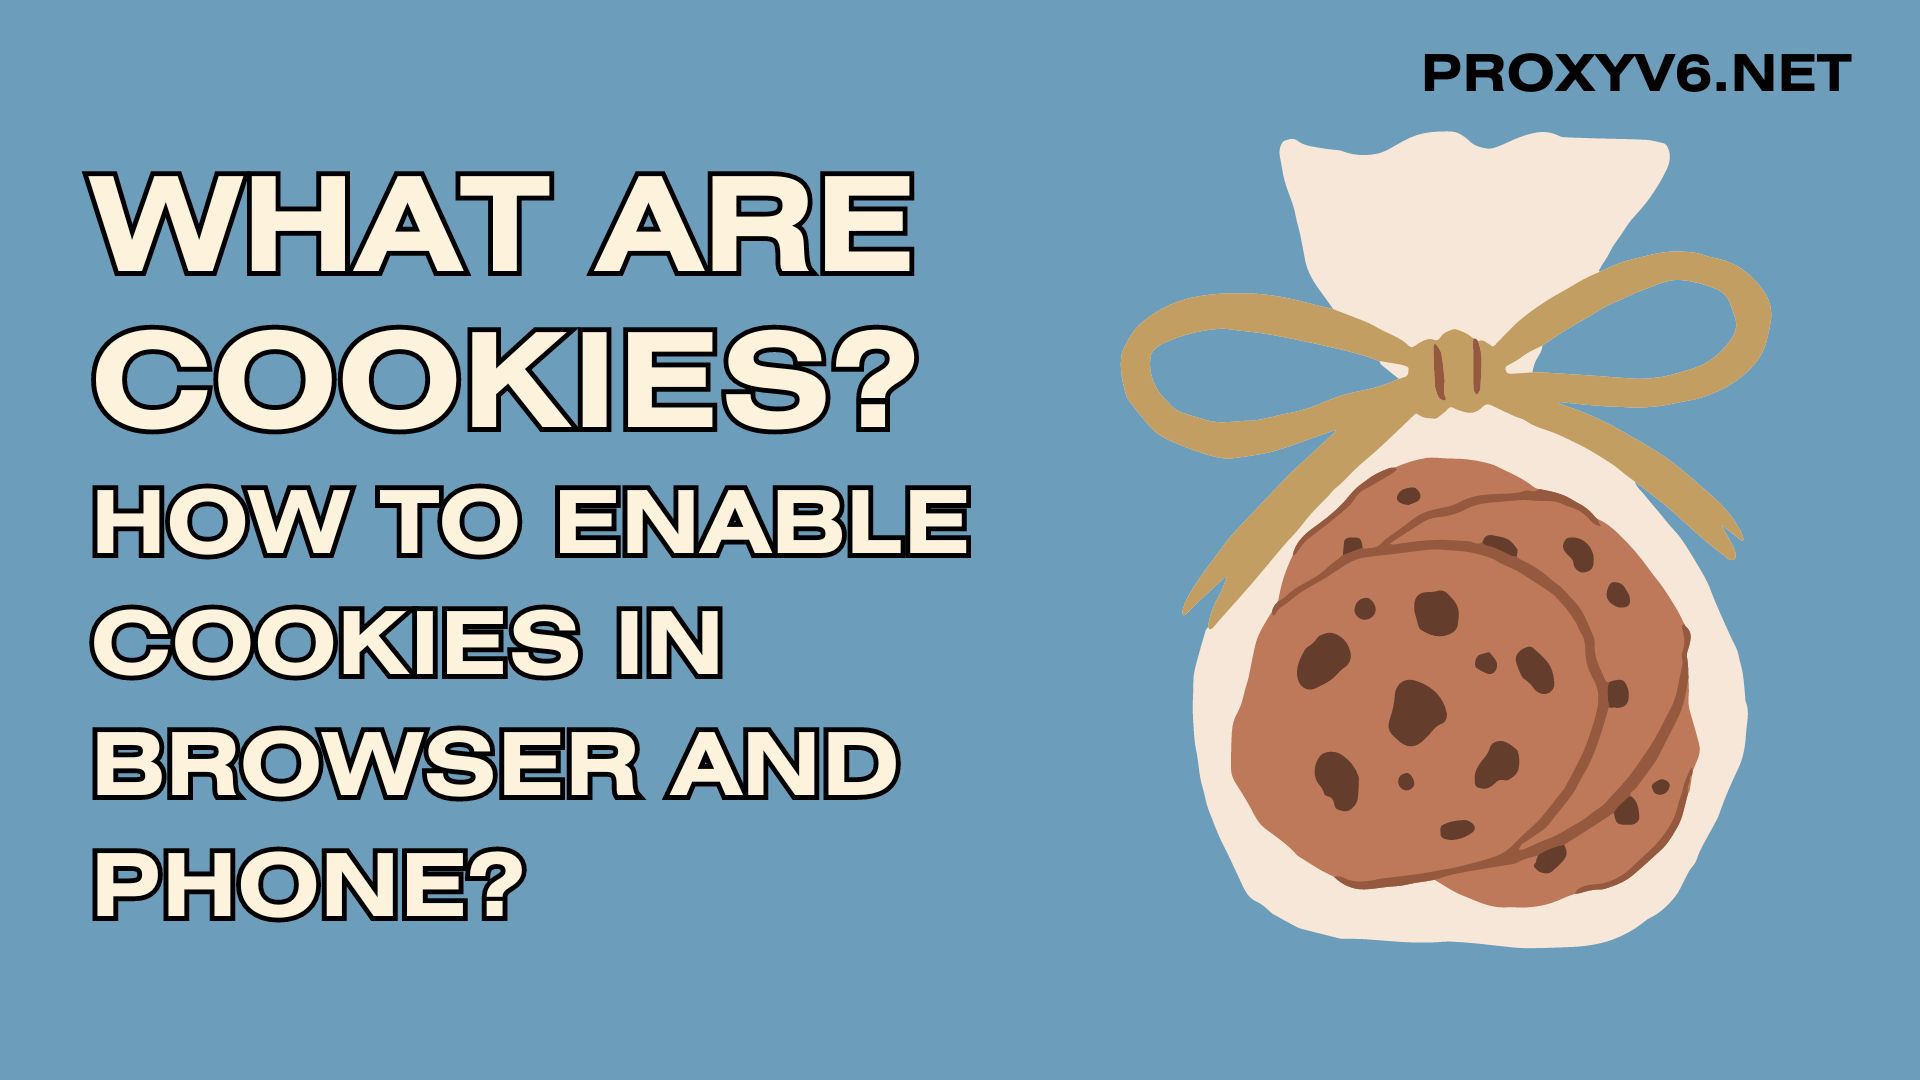 What are cookies? How to enable cookies in browser and phone?